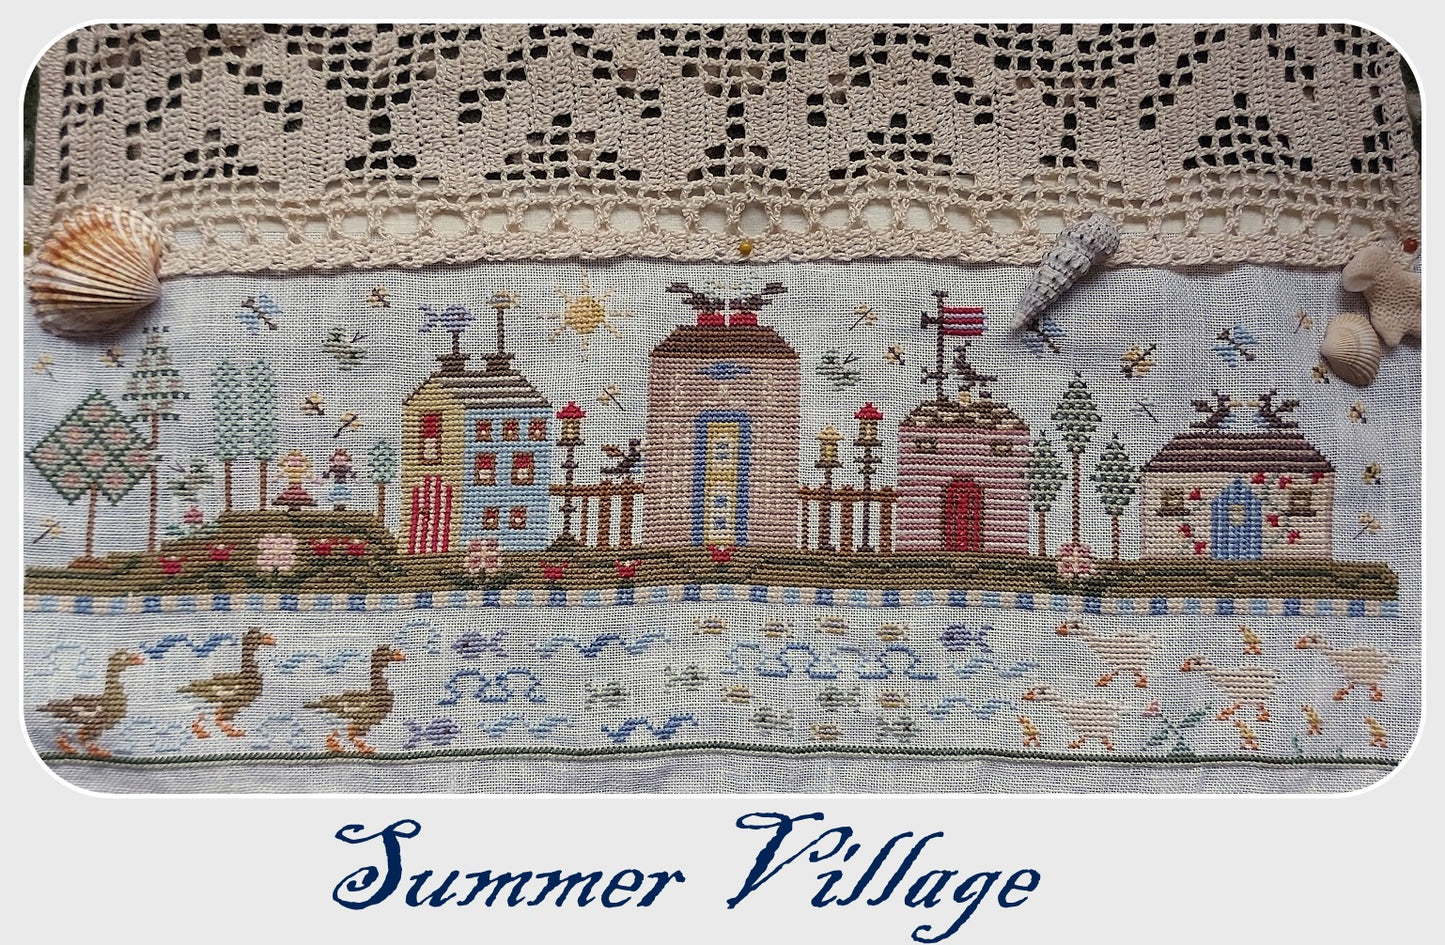 PREORDER Summer Villiage Cross Stitch Pattern Physical Copy Niky's Creations